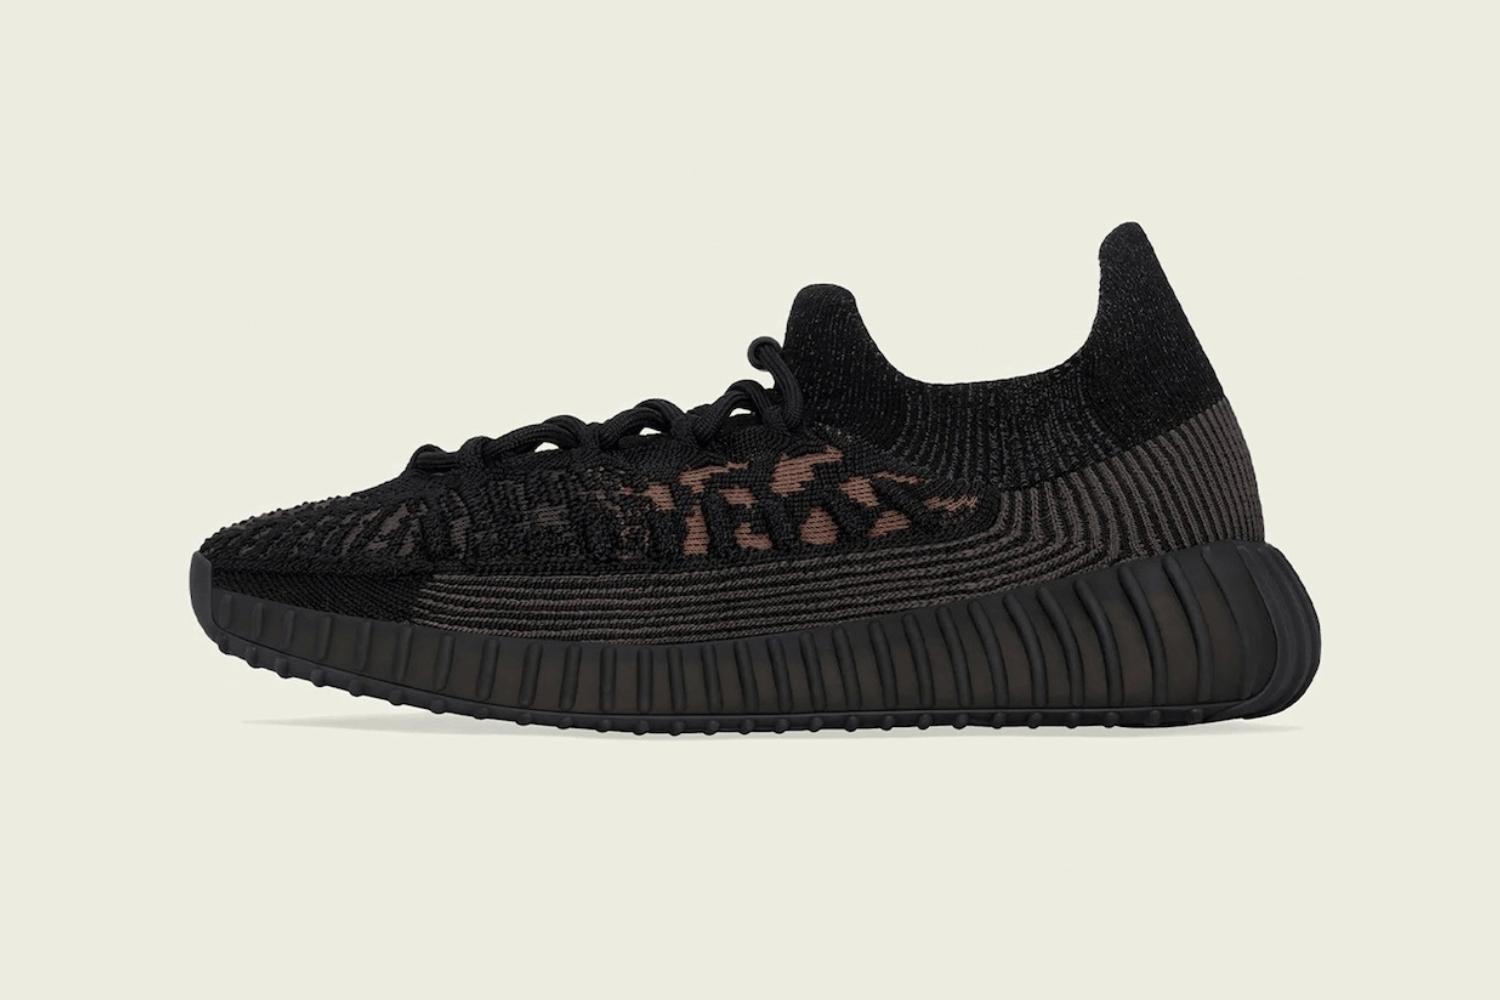 The adidas Yeezy 350 V2 CMPCT 'Slate Carbon' drops soon